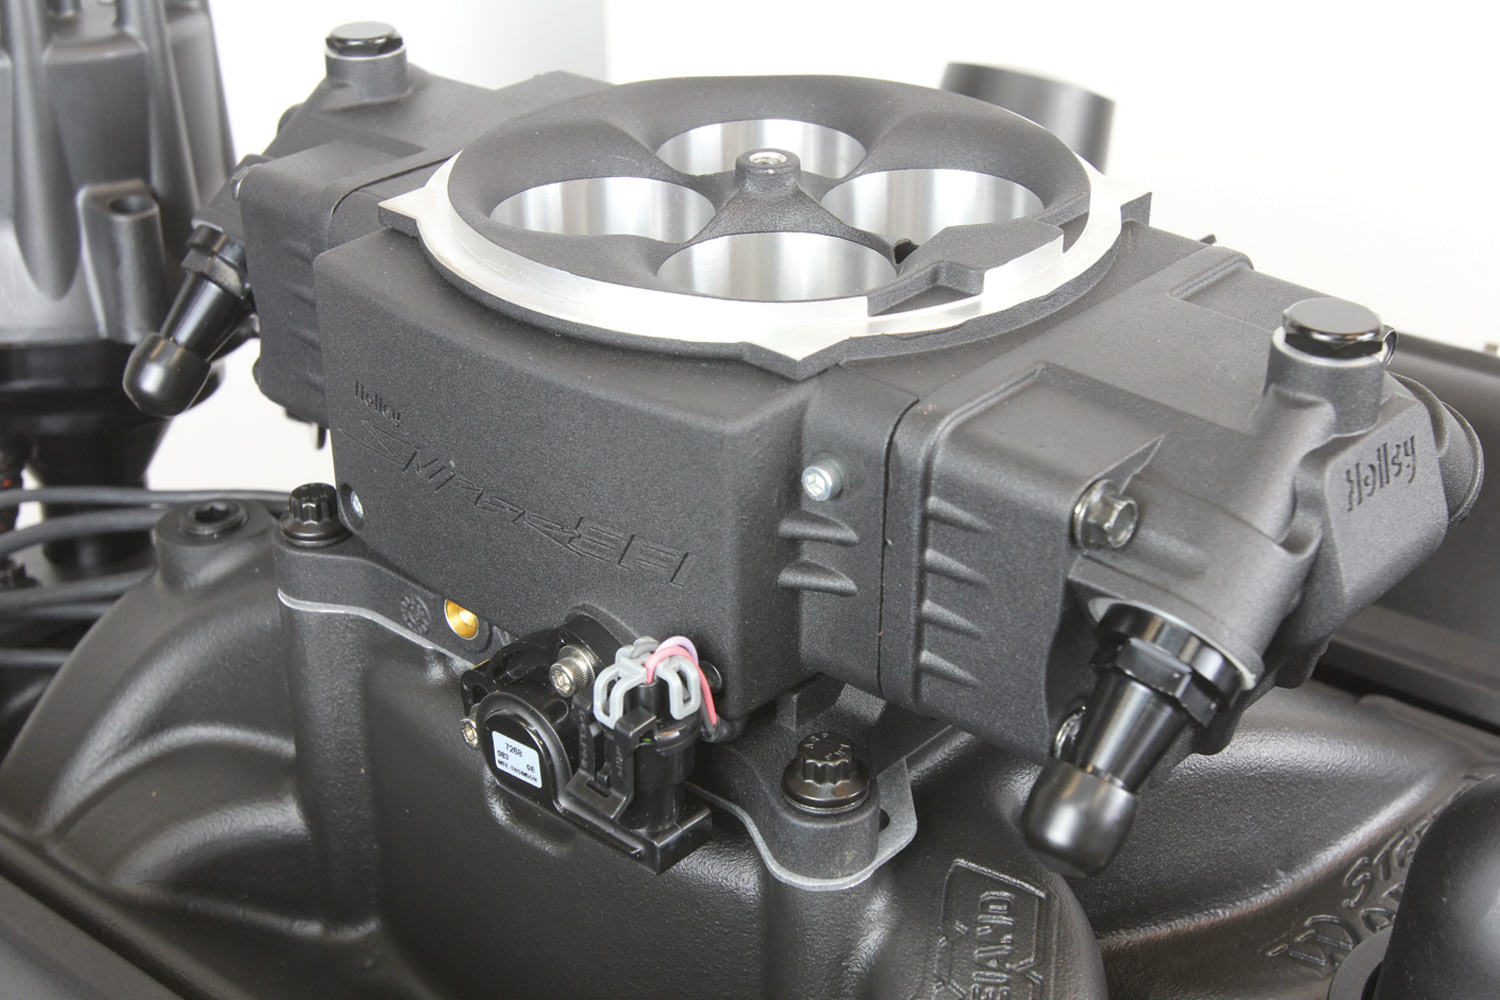 front view of the chosen throttle body, a Holley Sniper EFI Stealth 4150 (PN SNE-550-871) in black